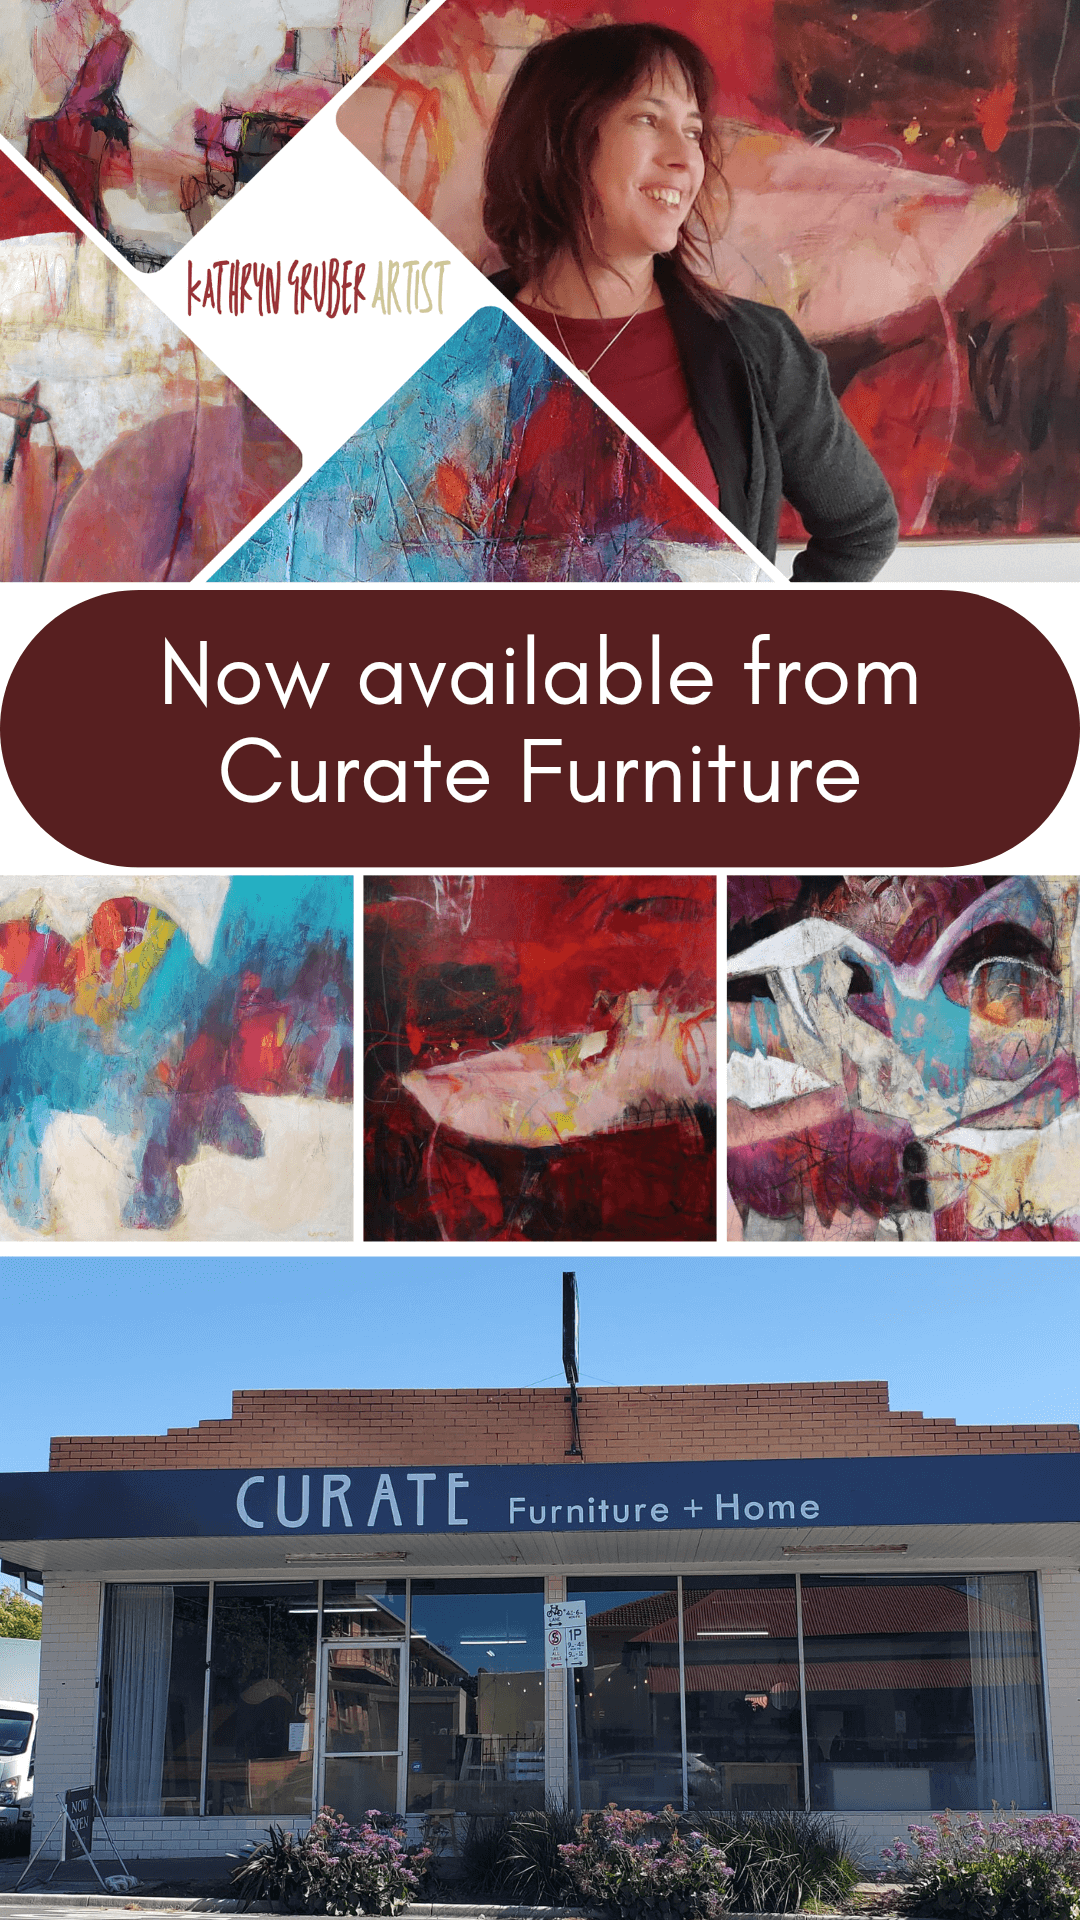 Now available from Curate Furniture